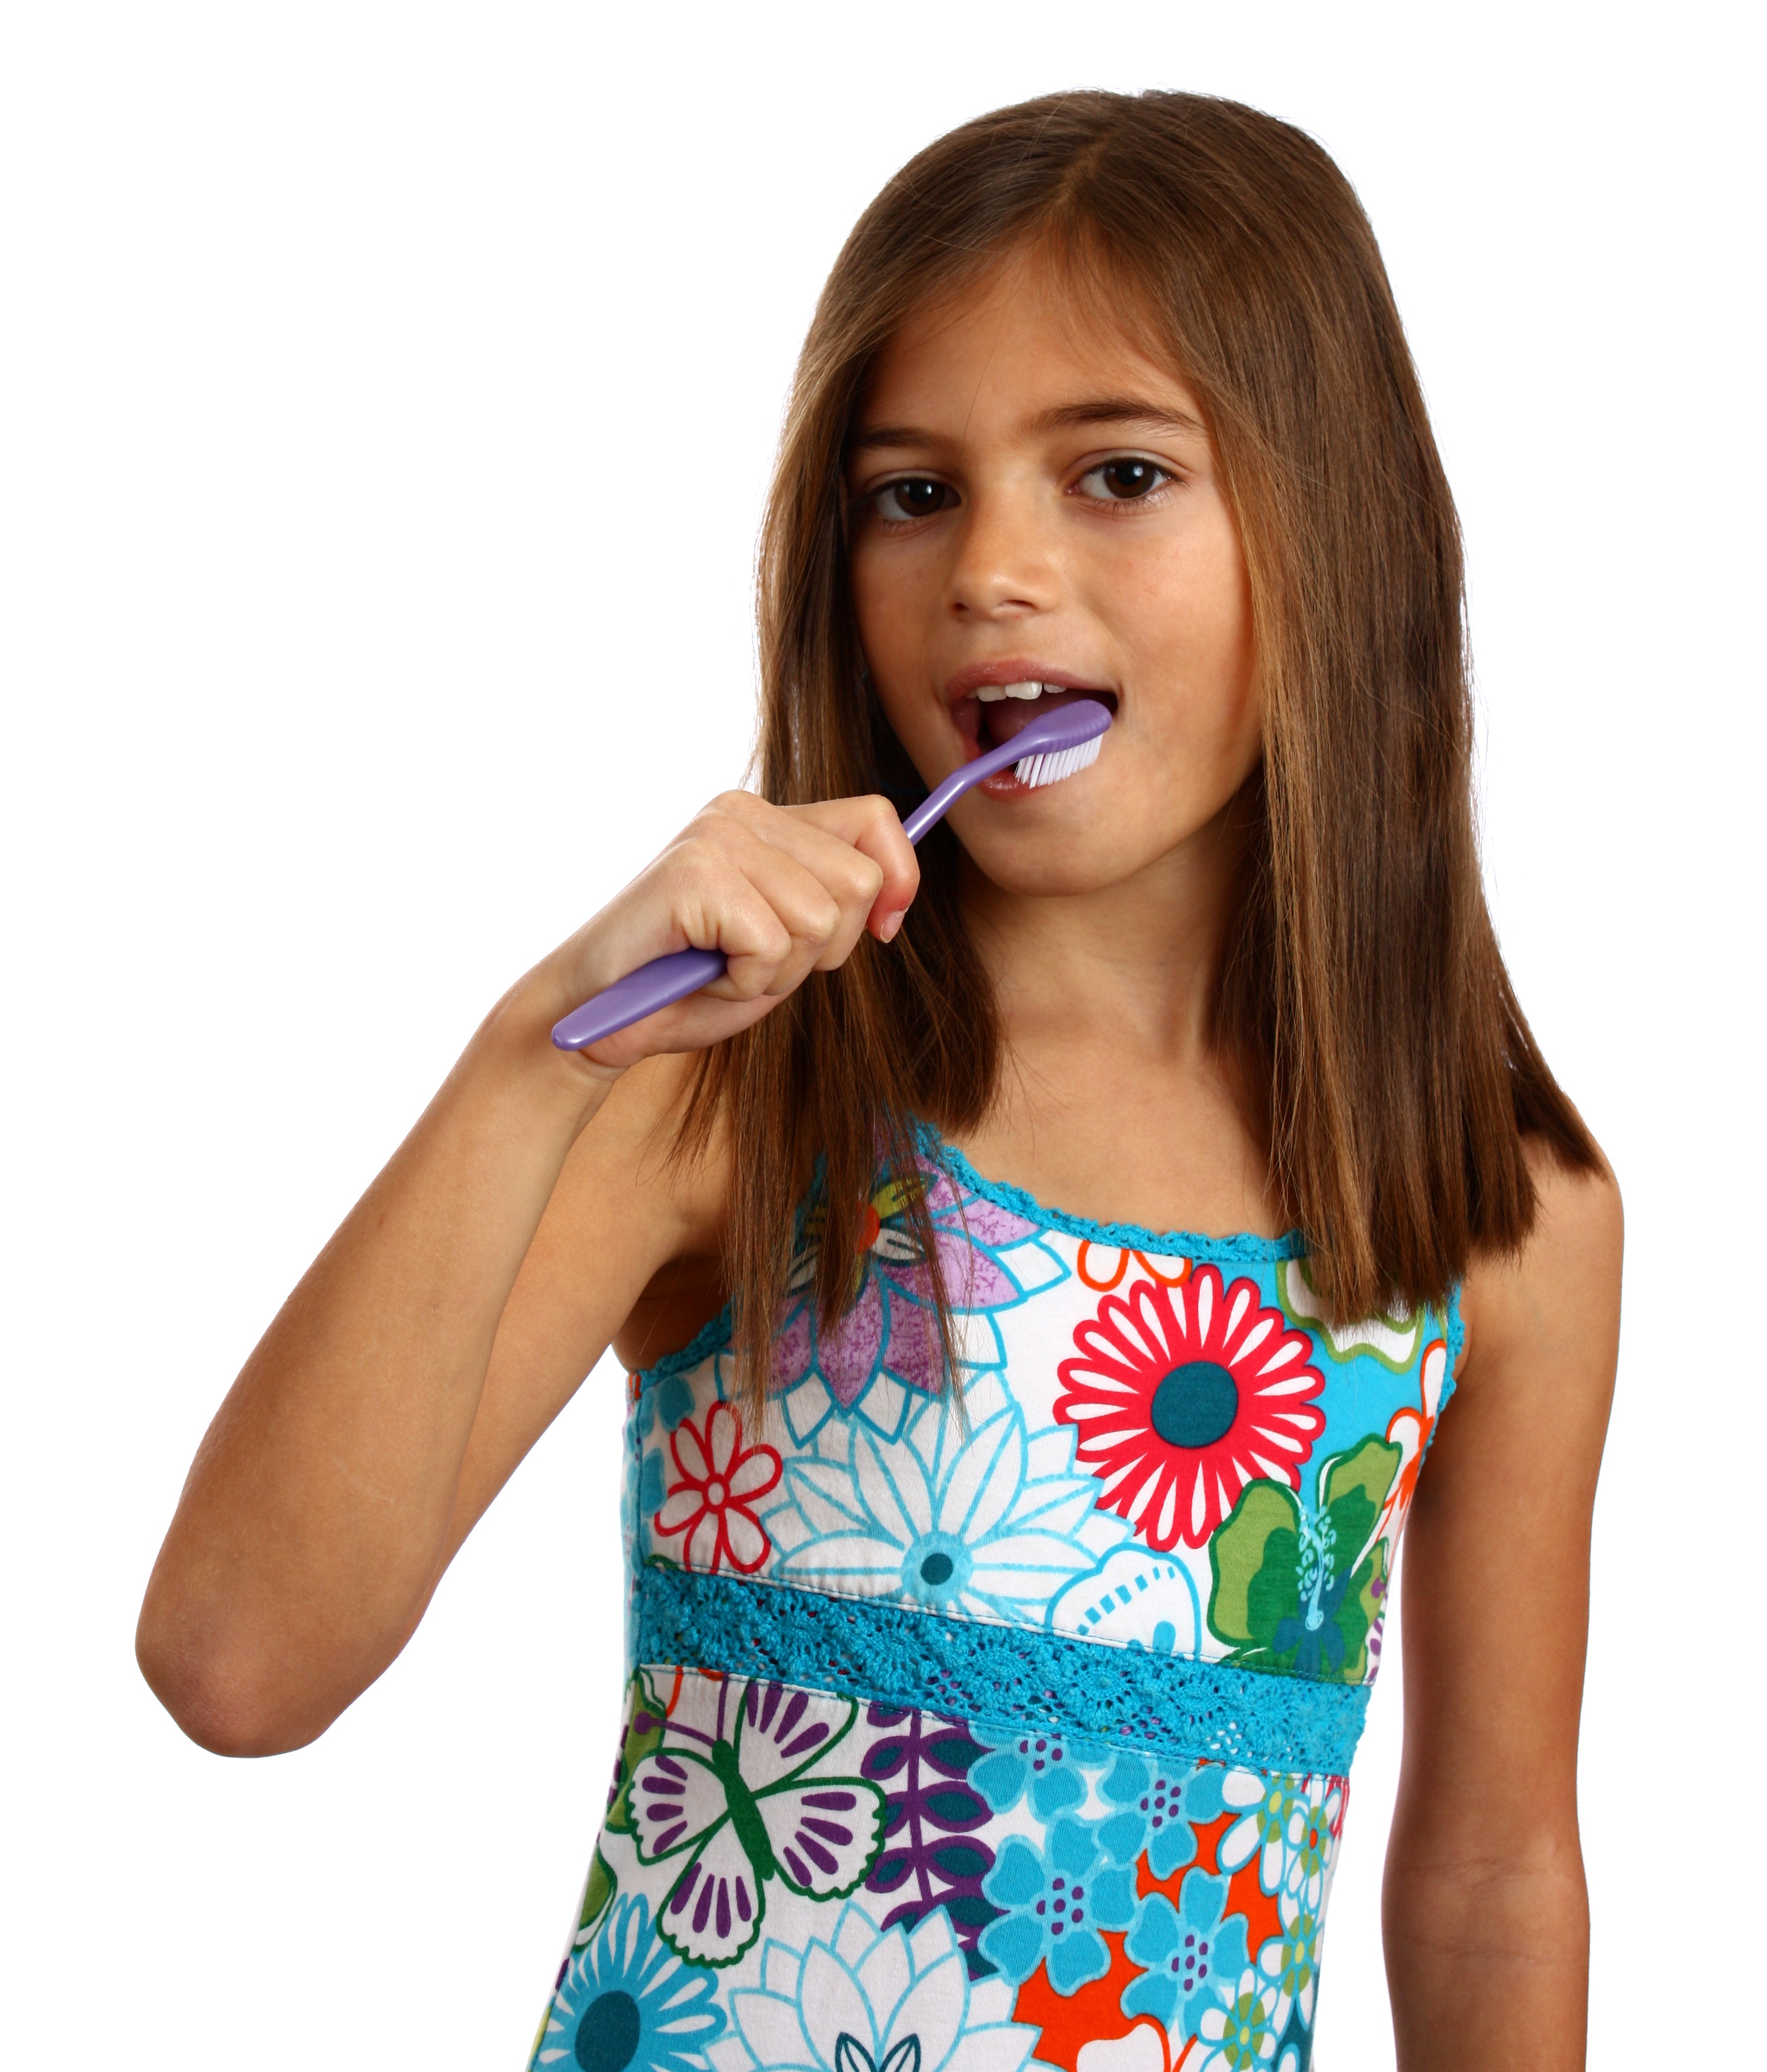 A pretty young girl brushing her teeth photo